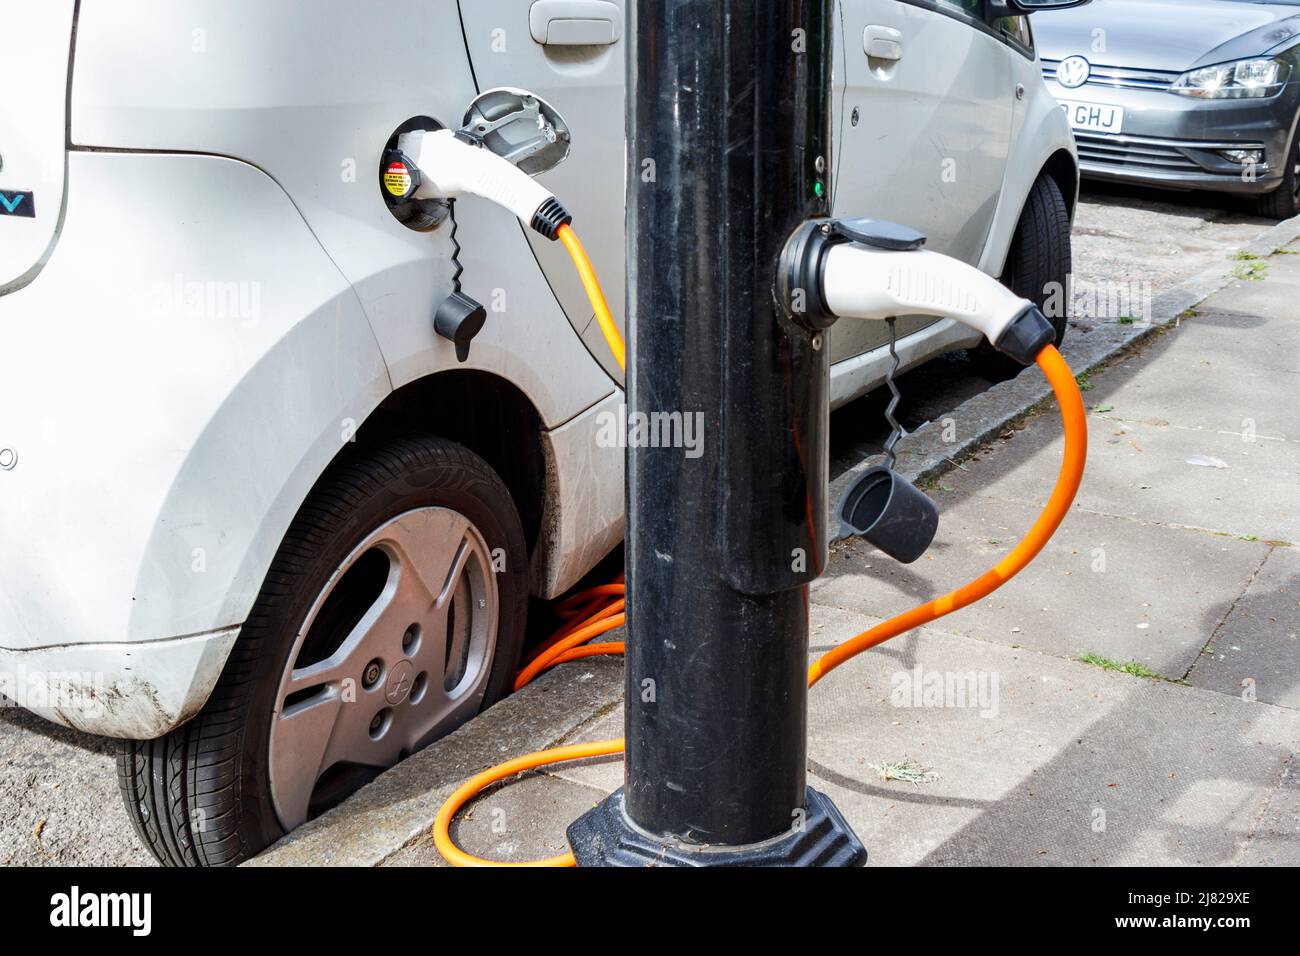 An electric vehicle recharging at a roadside lamp post recharging point,  London, UK Stock Photo